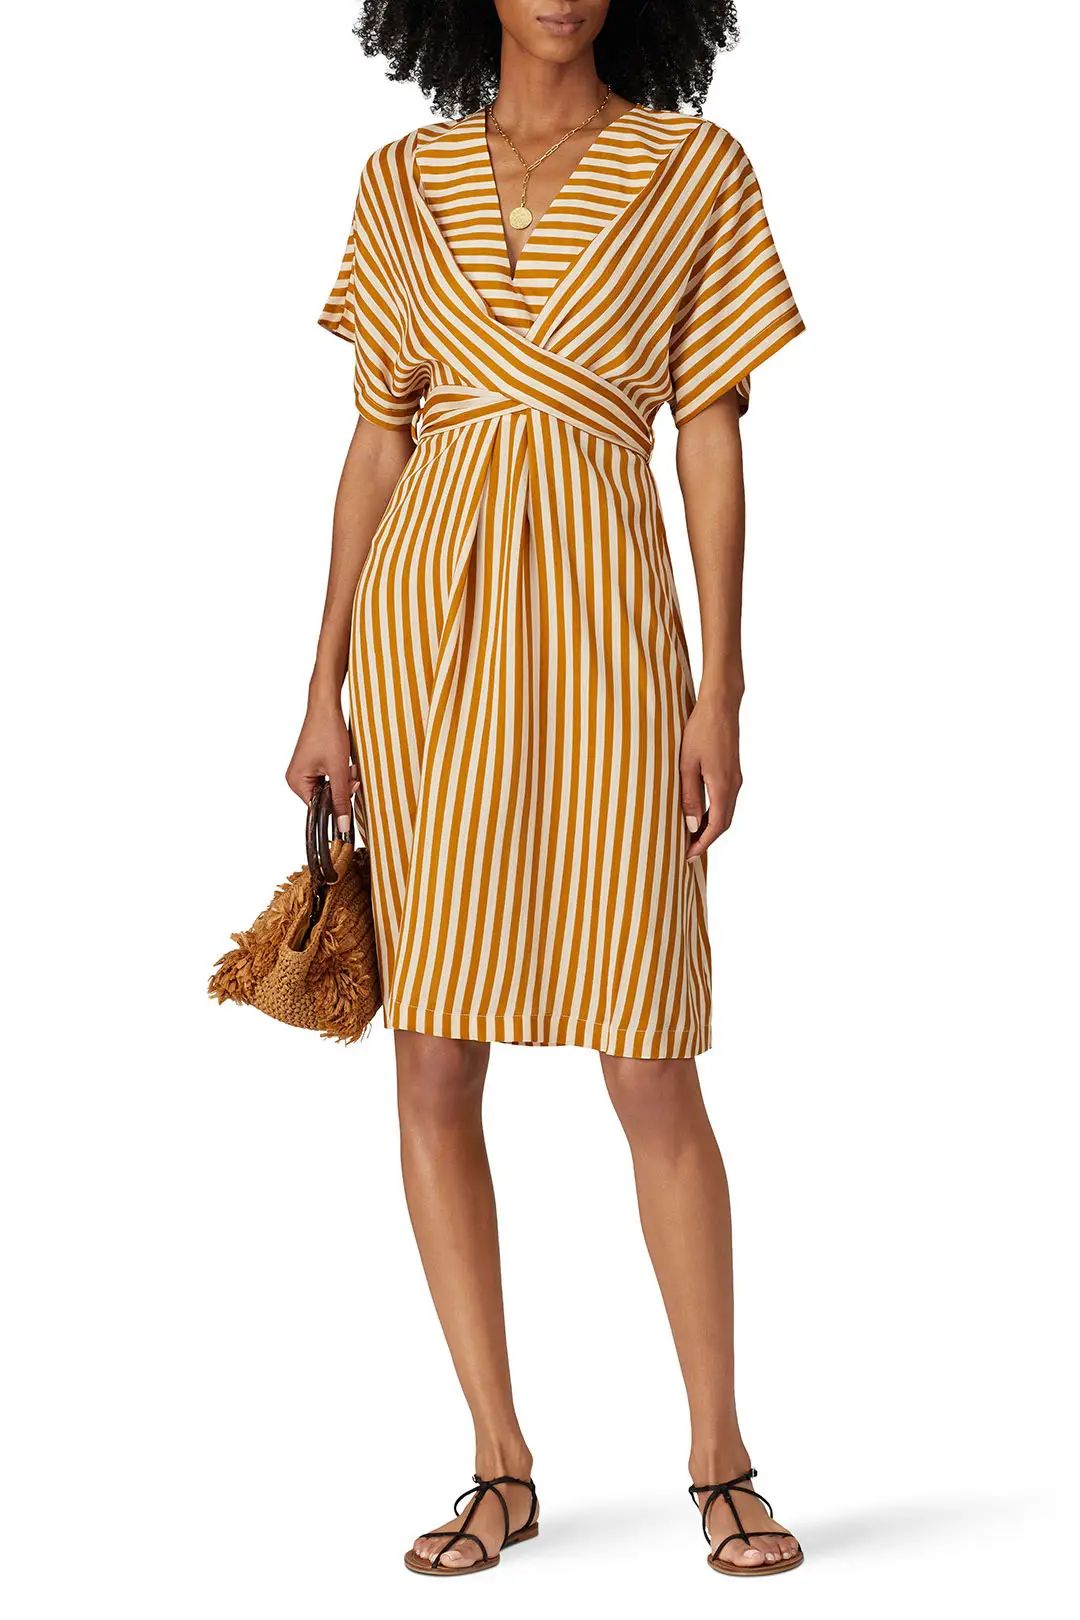 Moon River Yellow Striped Dress | Rent The Runway